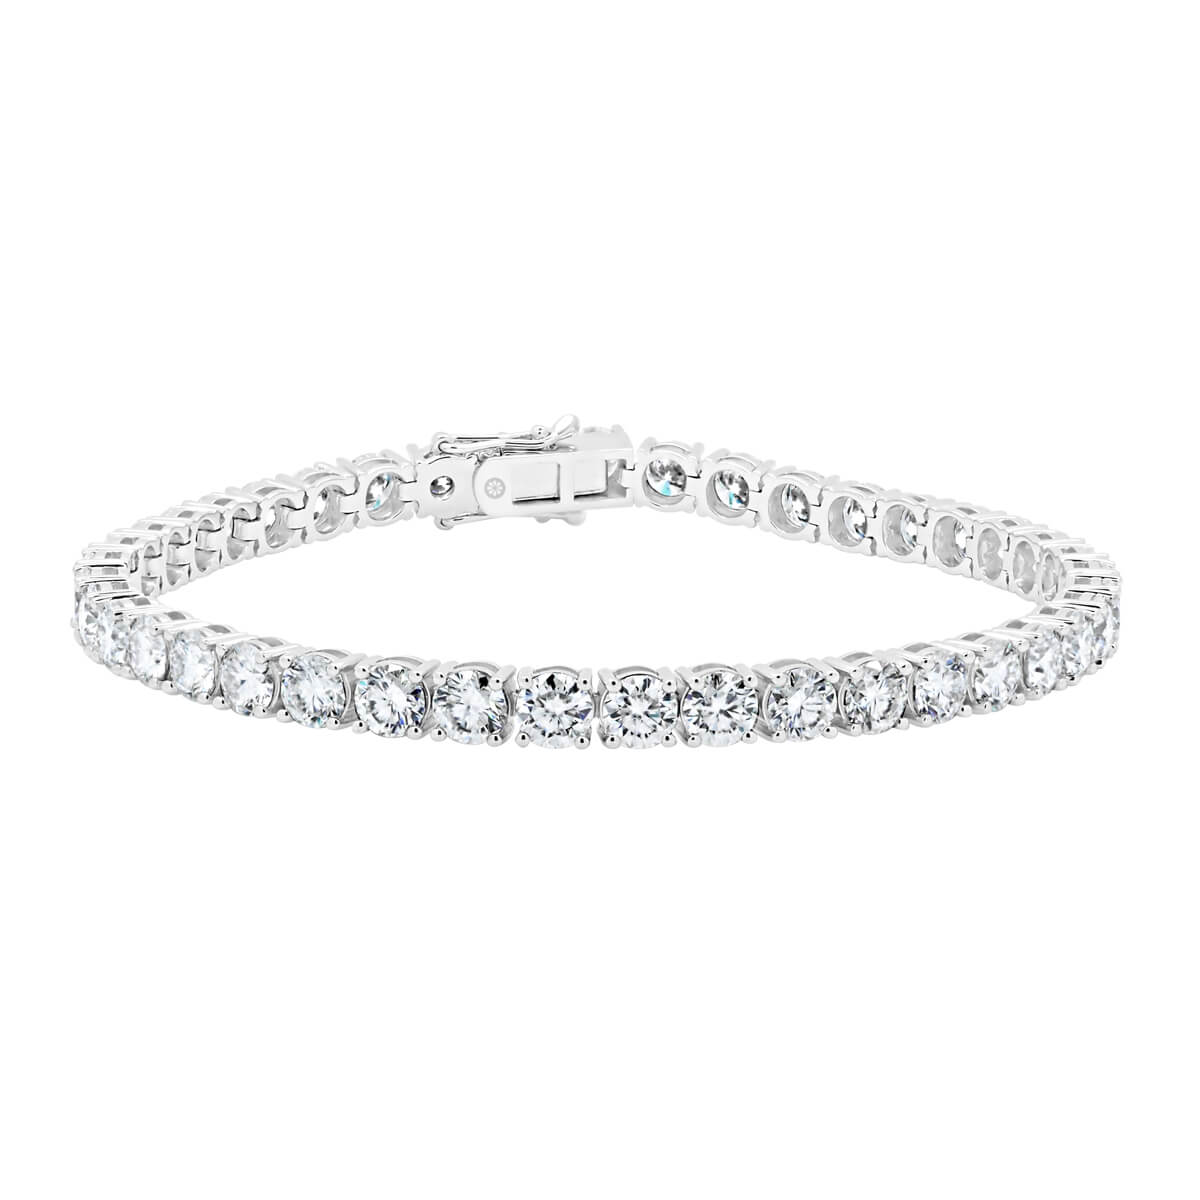 Mikayla 4.0 Lgd Classic 4-Prong Tennis Bracelet In 18K Gold With Safety Clasp